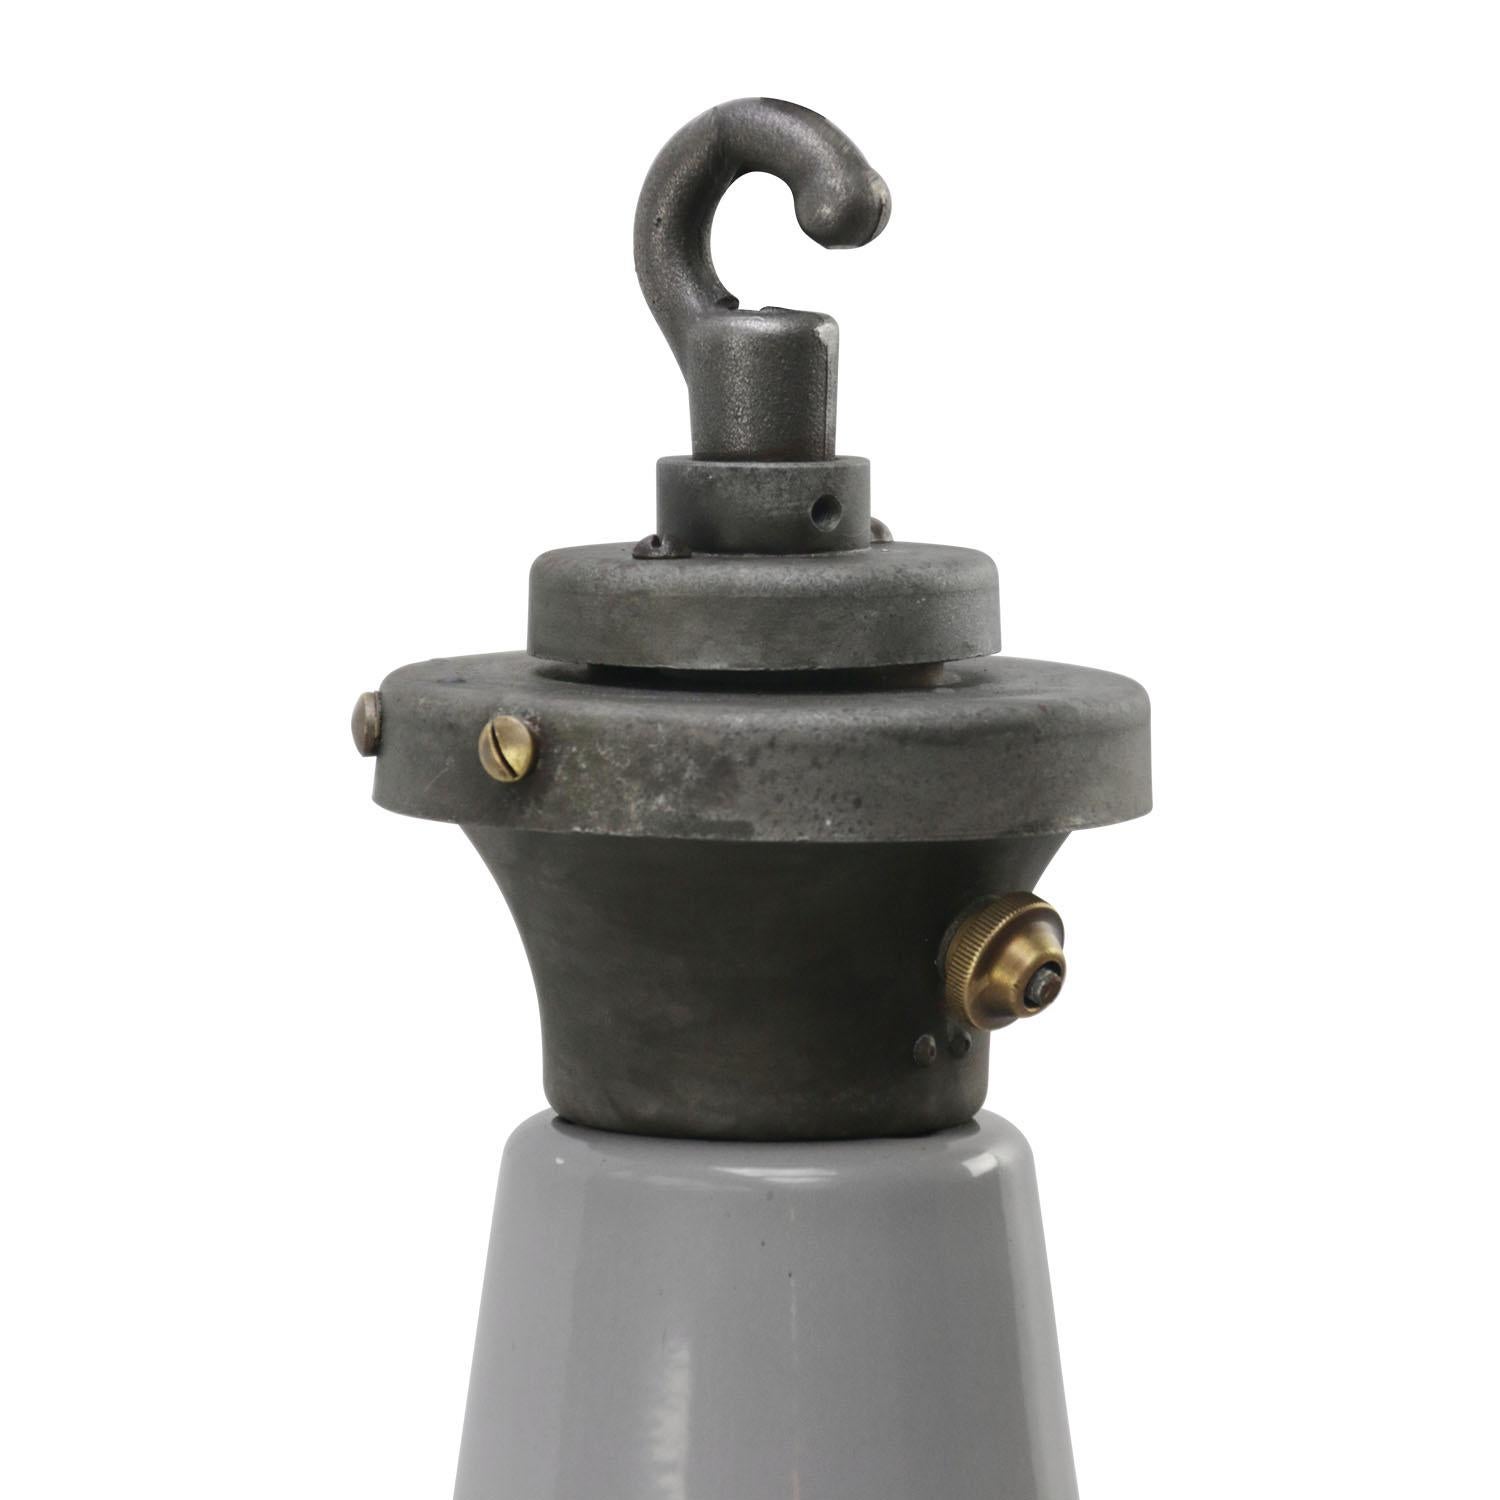 British industrial vintage pendants by Benjamin, RLM, UK
gray enamel with white inside
cast iron top

Weight 2.70 kg / 6 lb

Priced per individual item. All lamps have been made suitable by international standards for incandescent light bulbs,